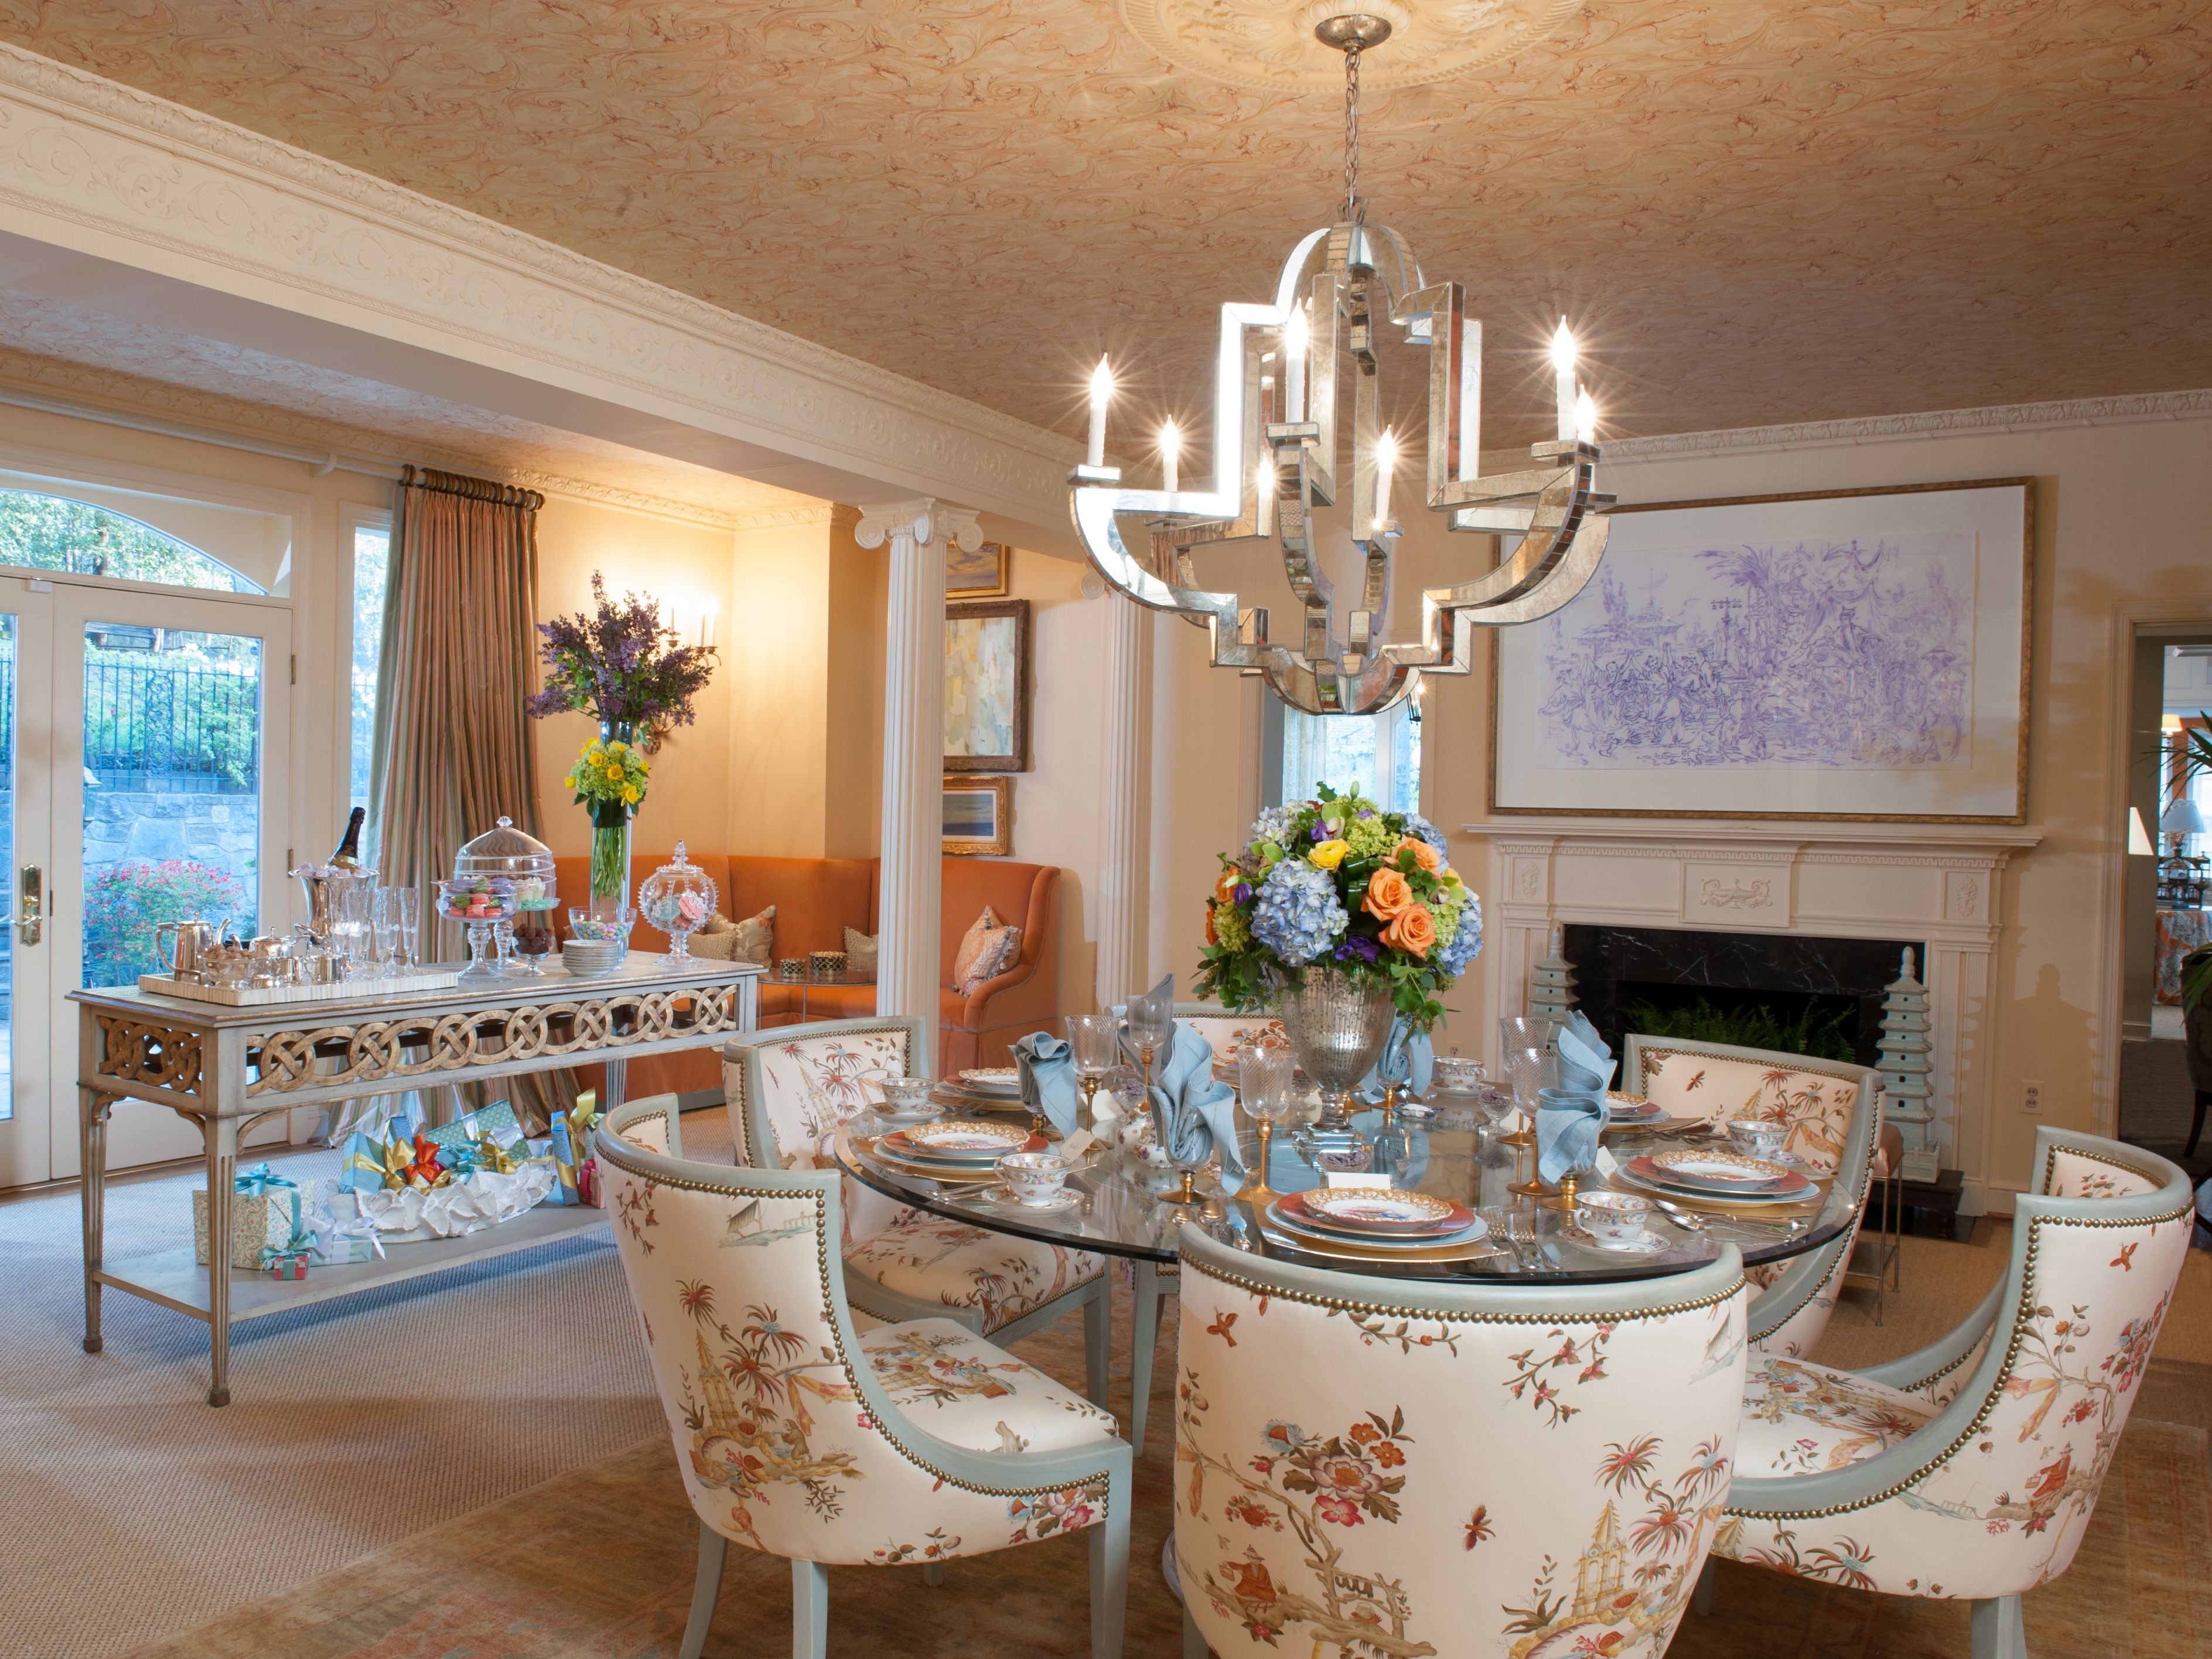 Multicolored Formal Dining Room With Fireplace And Modern Metal Chandelier (View 28 of 30)